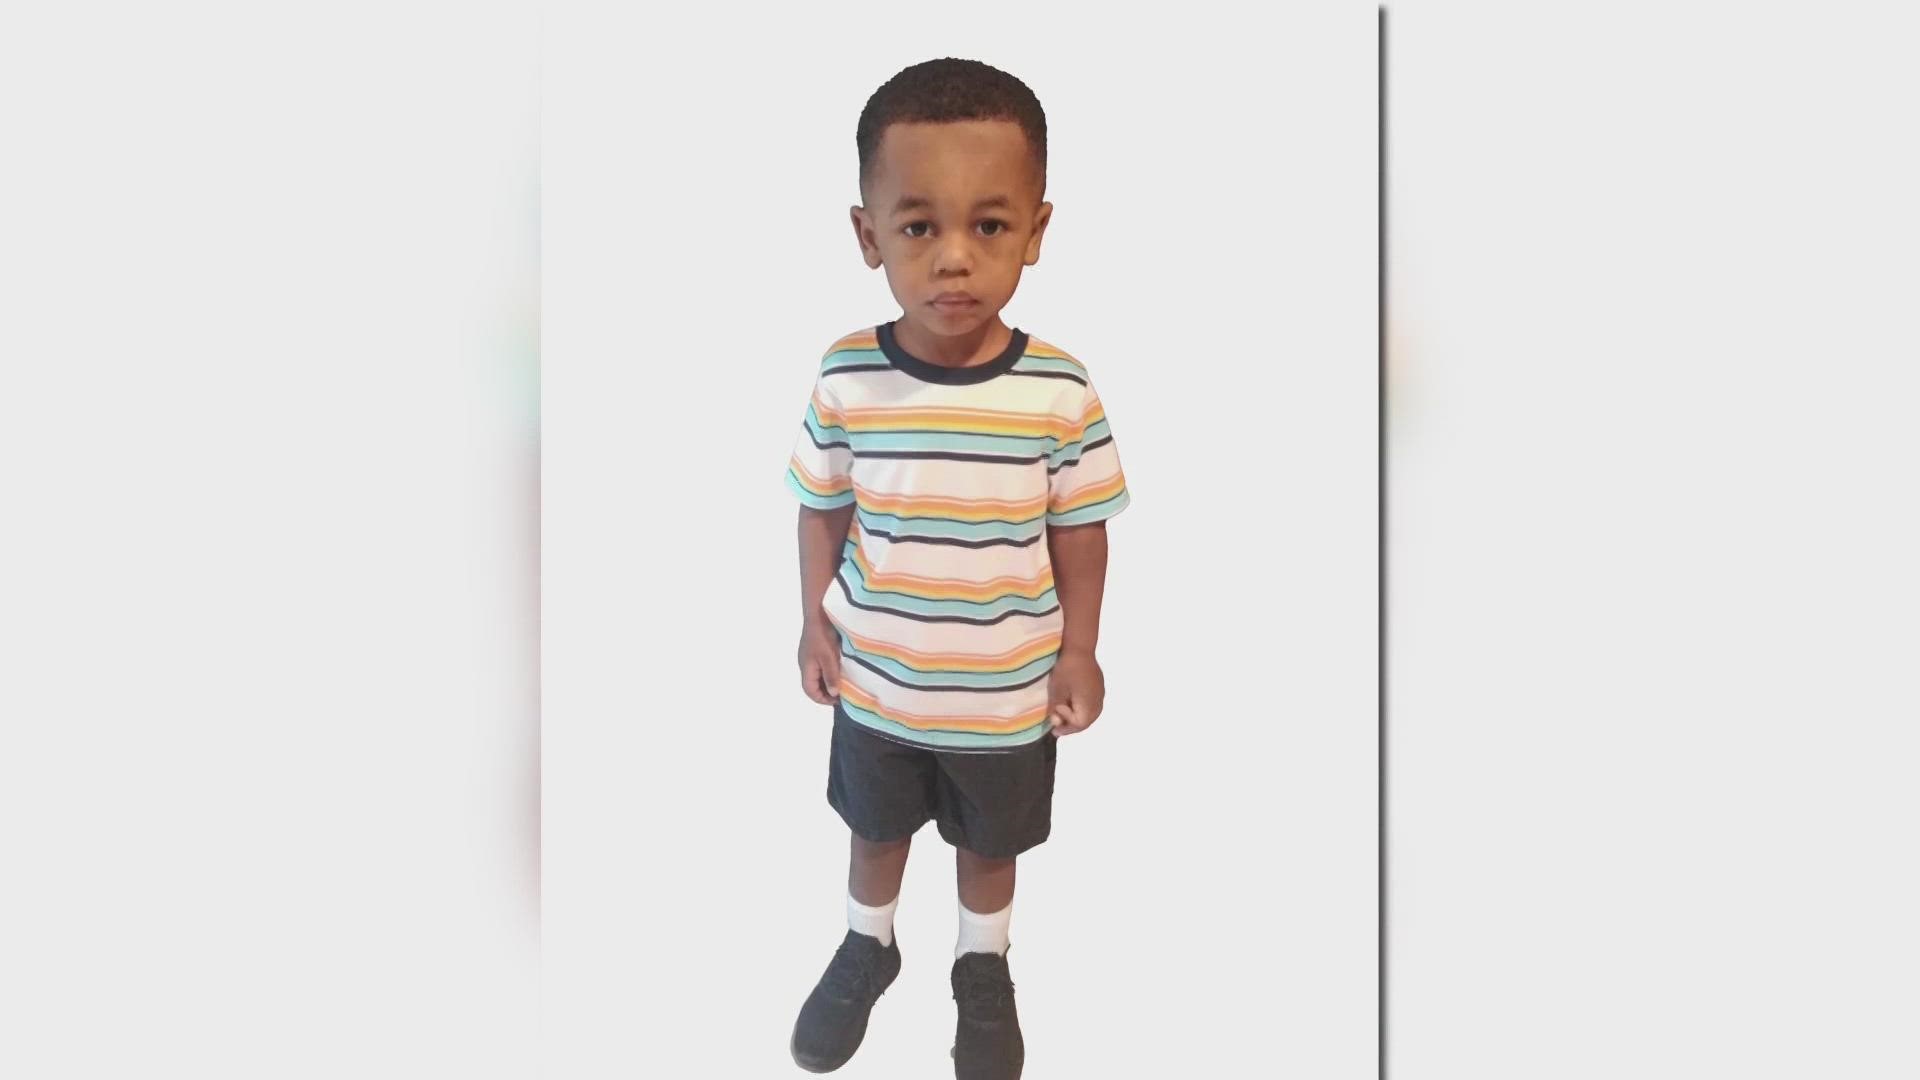 The Hampton Police Division shared a new photo of Codi Bigsby, the four-year-old boy reported missing from a Buckroe Beach neighborhood.